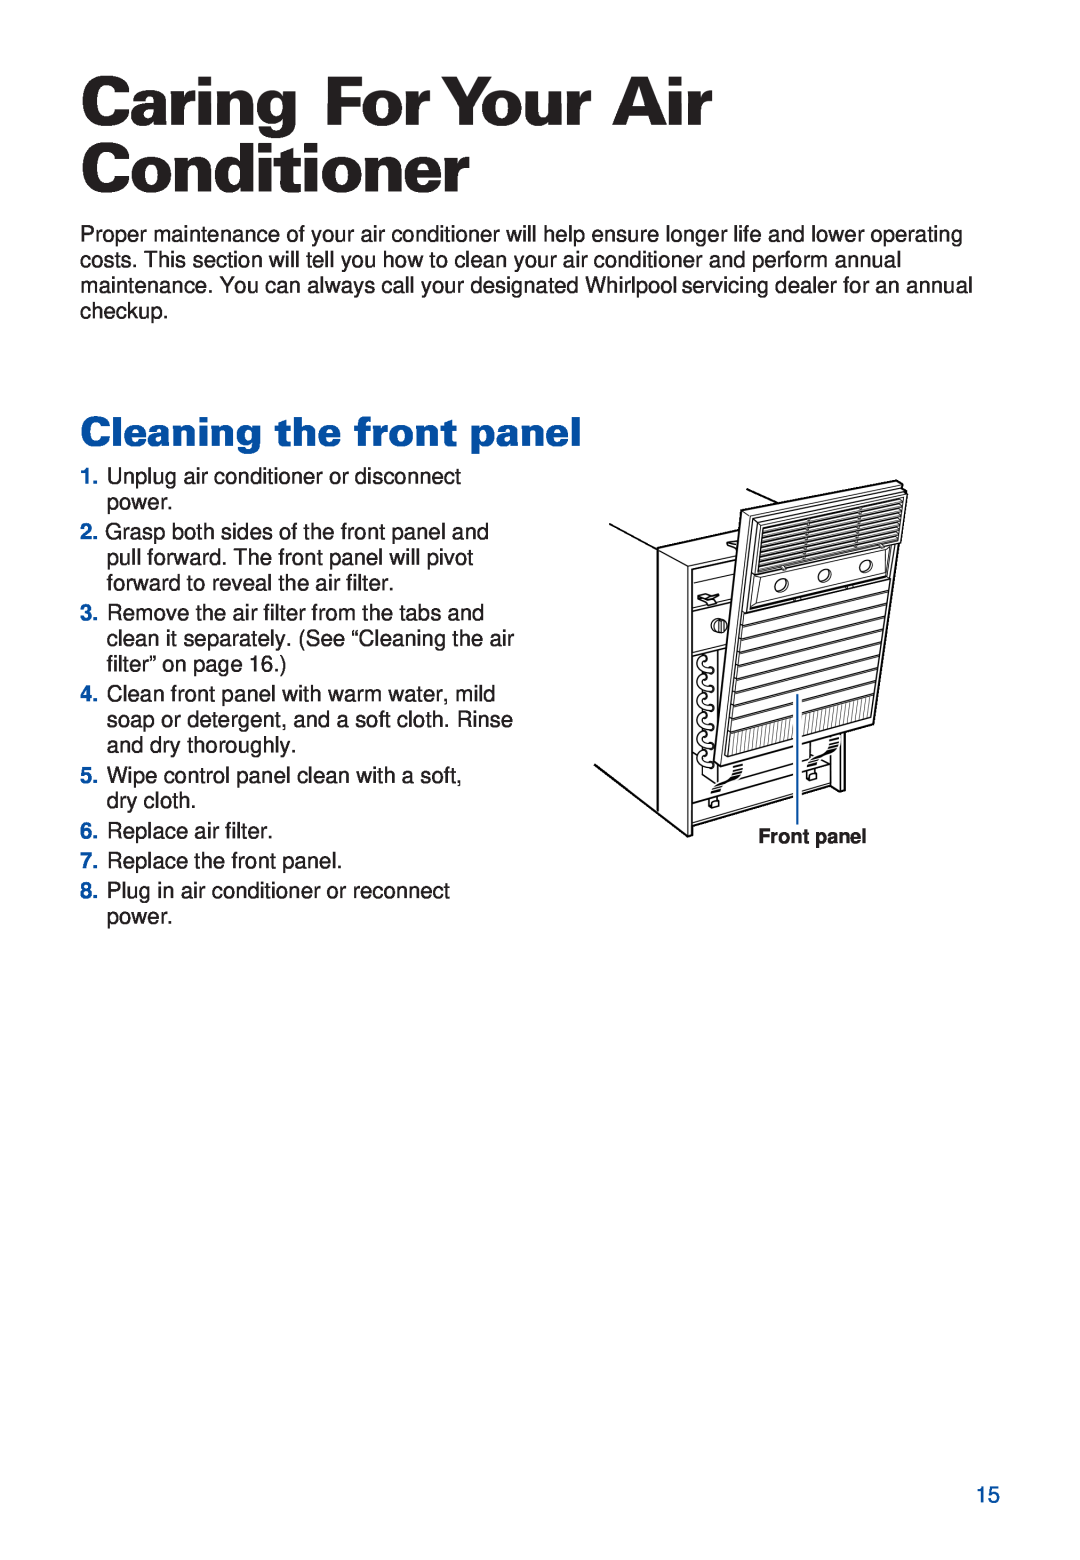 Whirlpool ACS052XH1 warranty Caring For Your Air Conditioner, Cleaning the front panel 